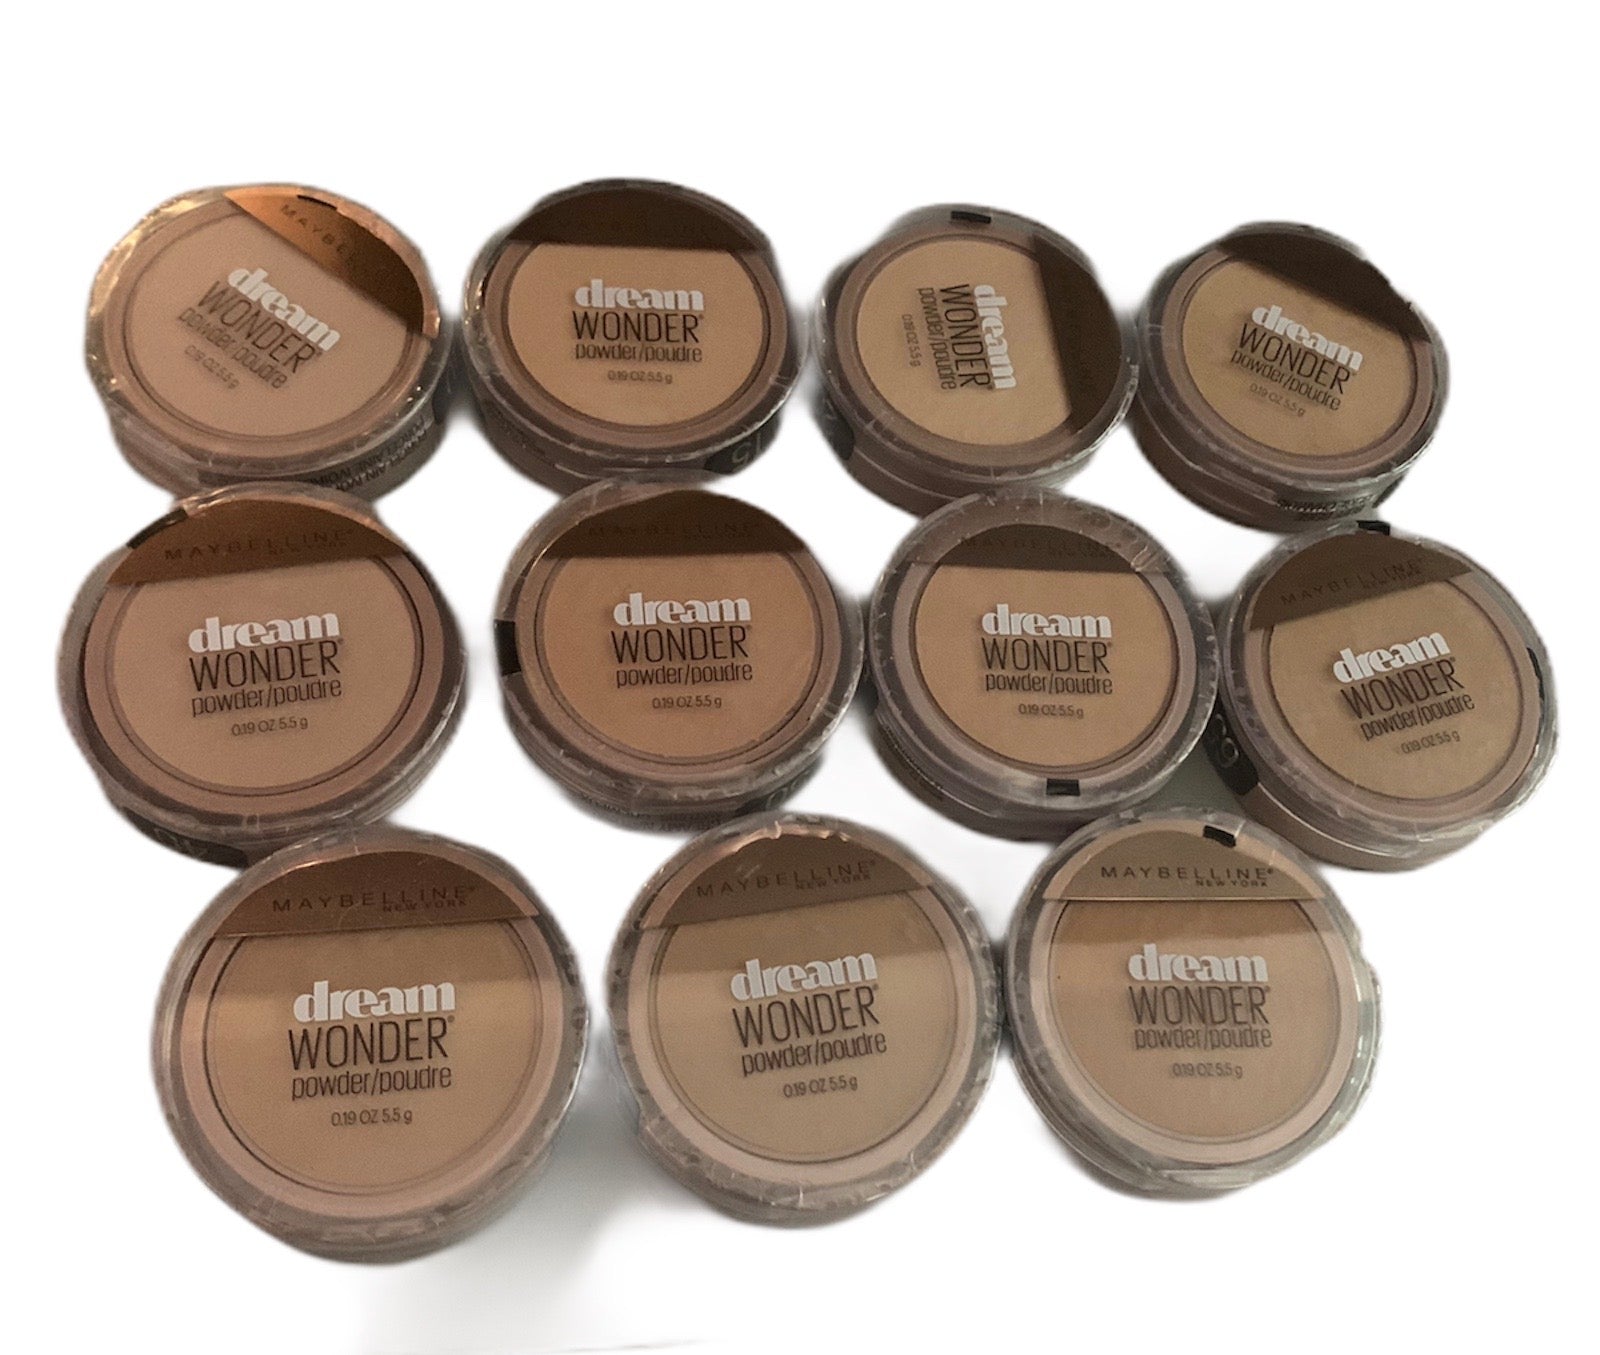 Maybelline Dream Wonder Compact Face Powder Assorted Shades - 50 Units Shelf Pull makeup cosmetics